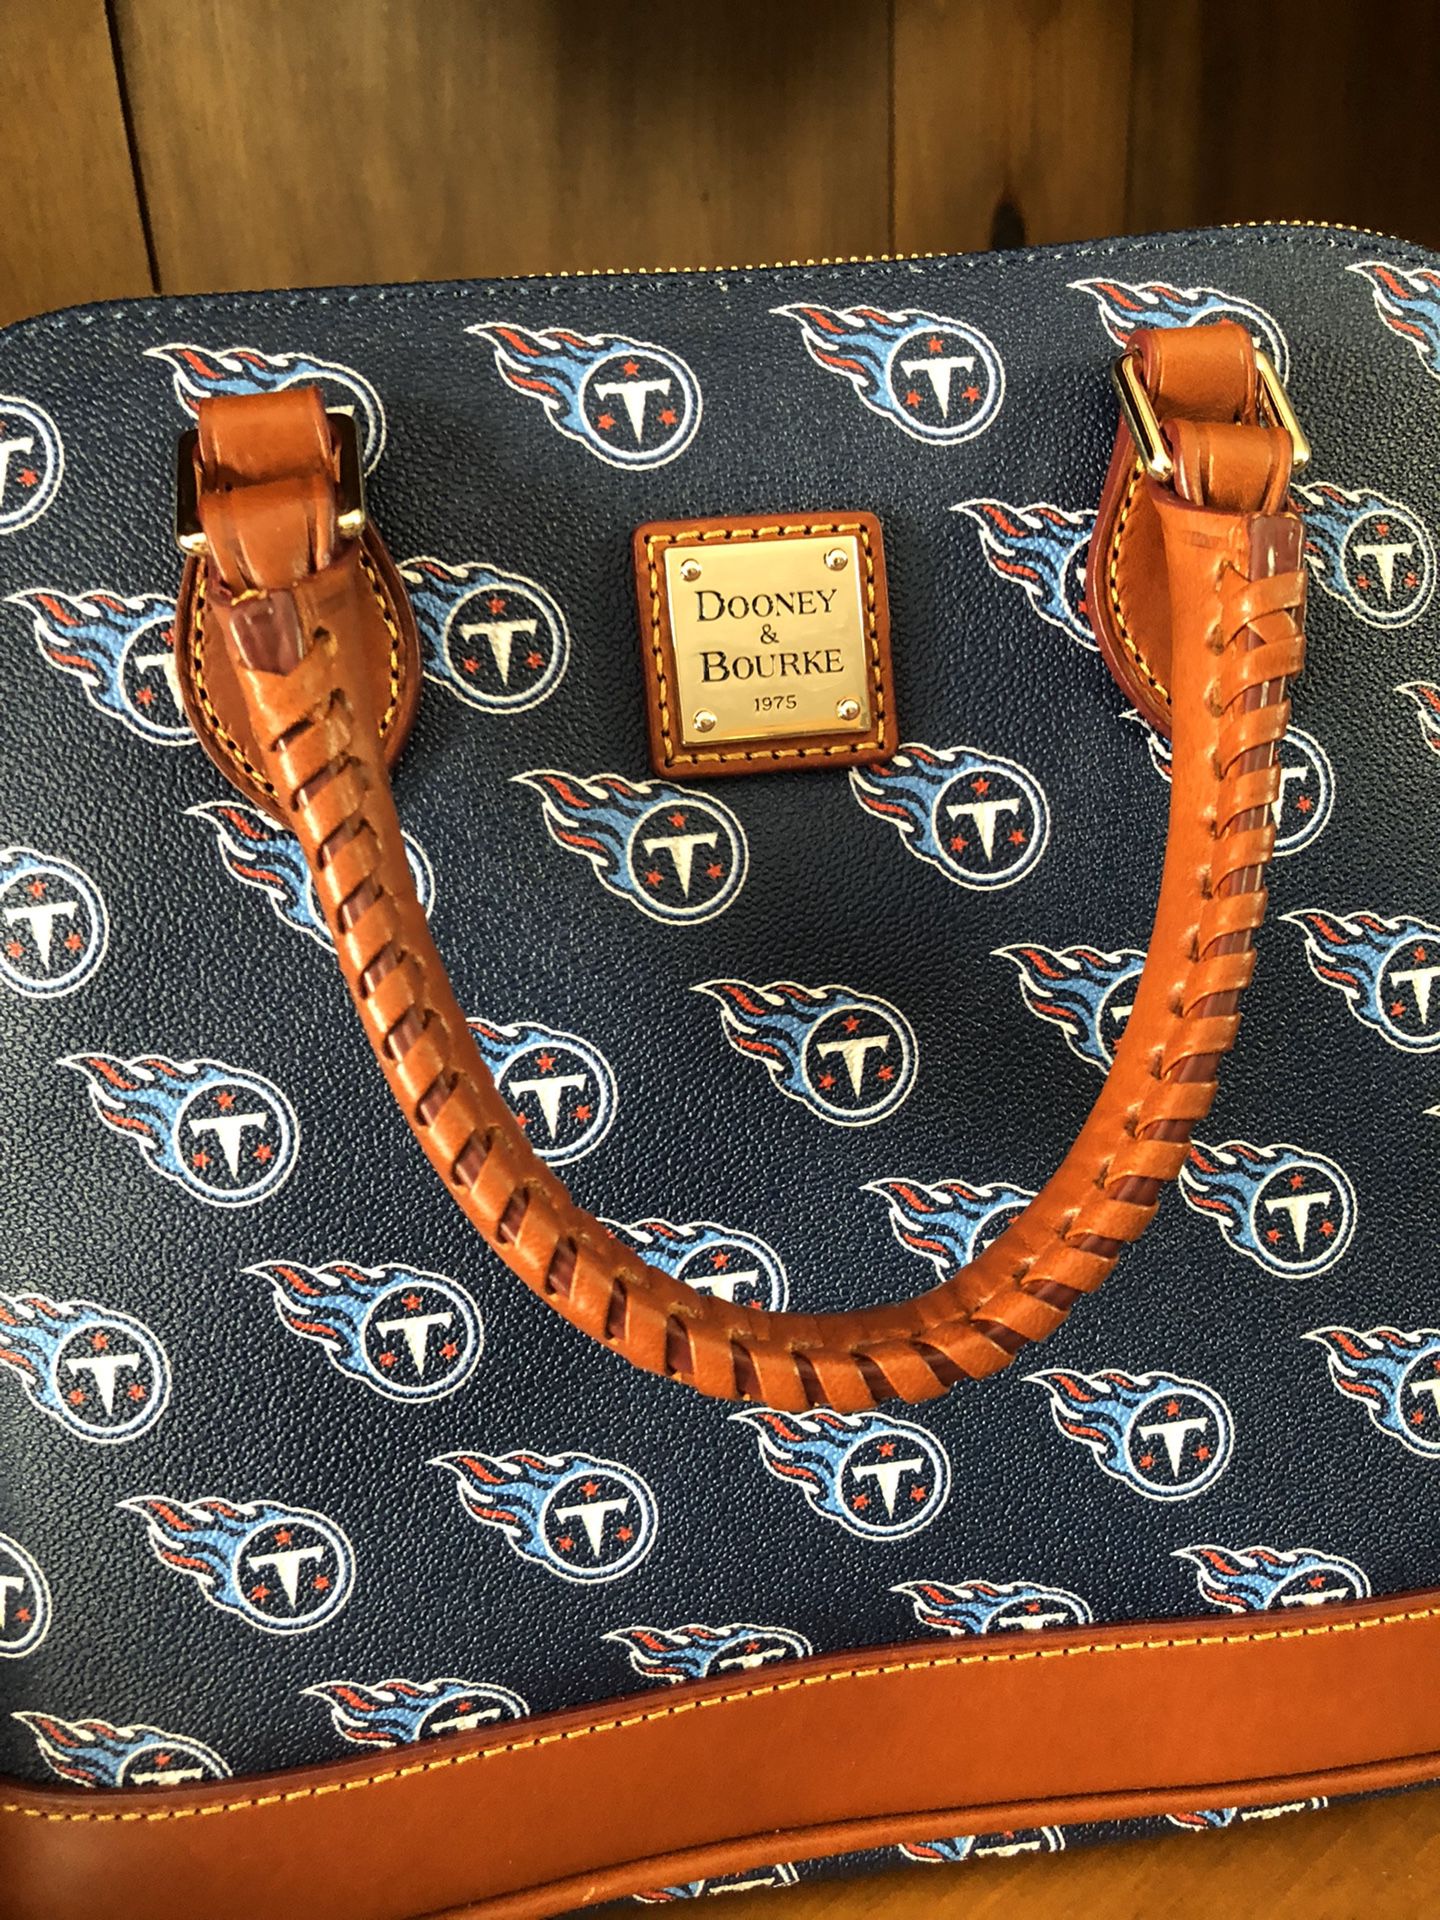 Official NFL Titans logo leather bag by Dooney and Bourke. NWT